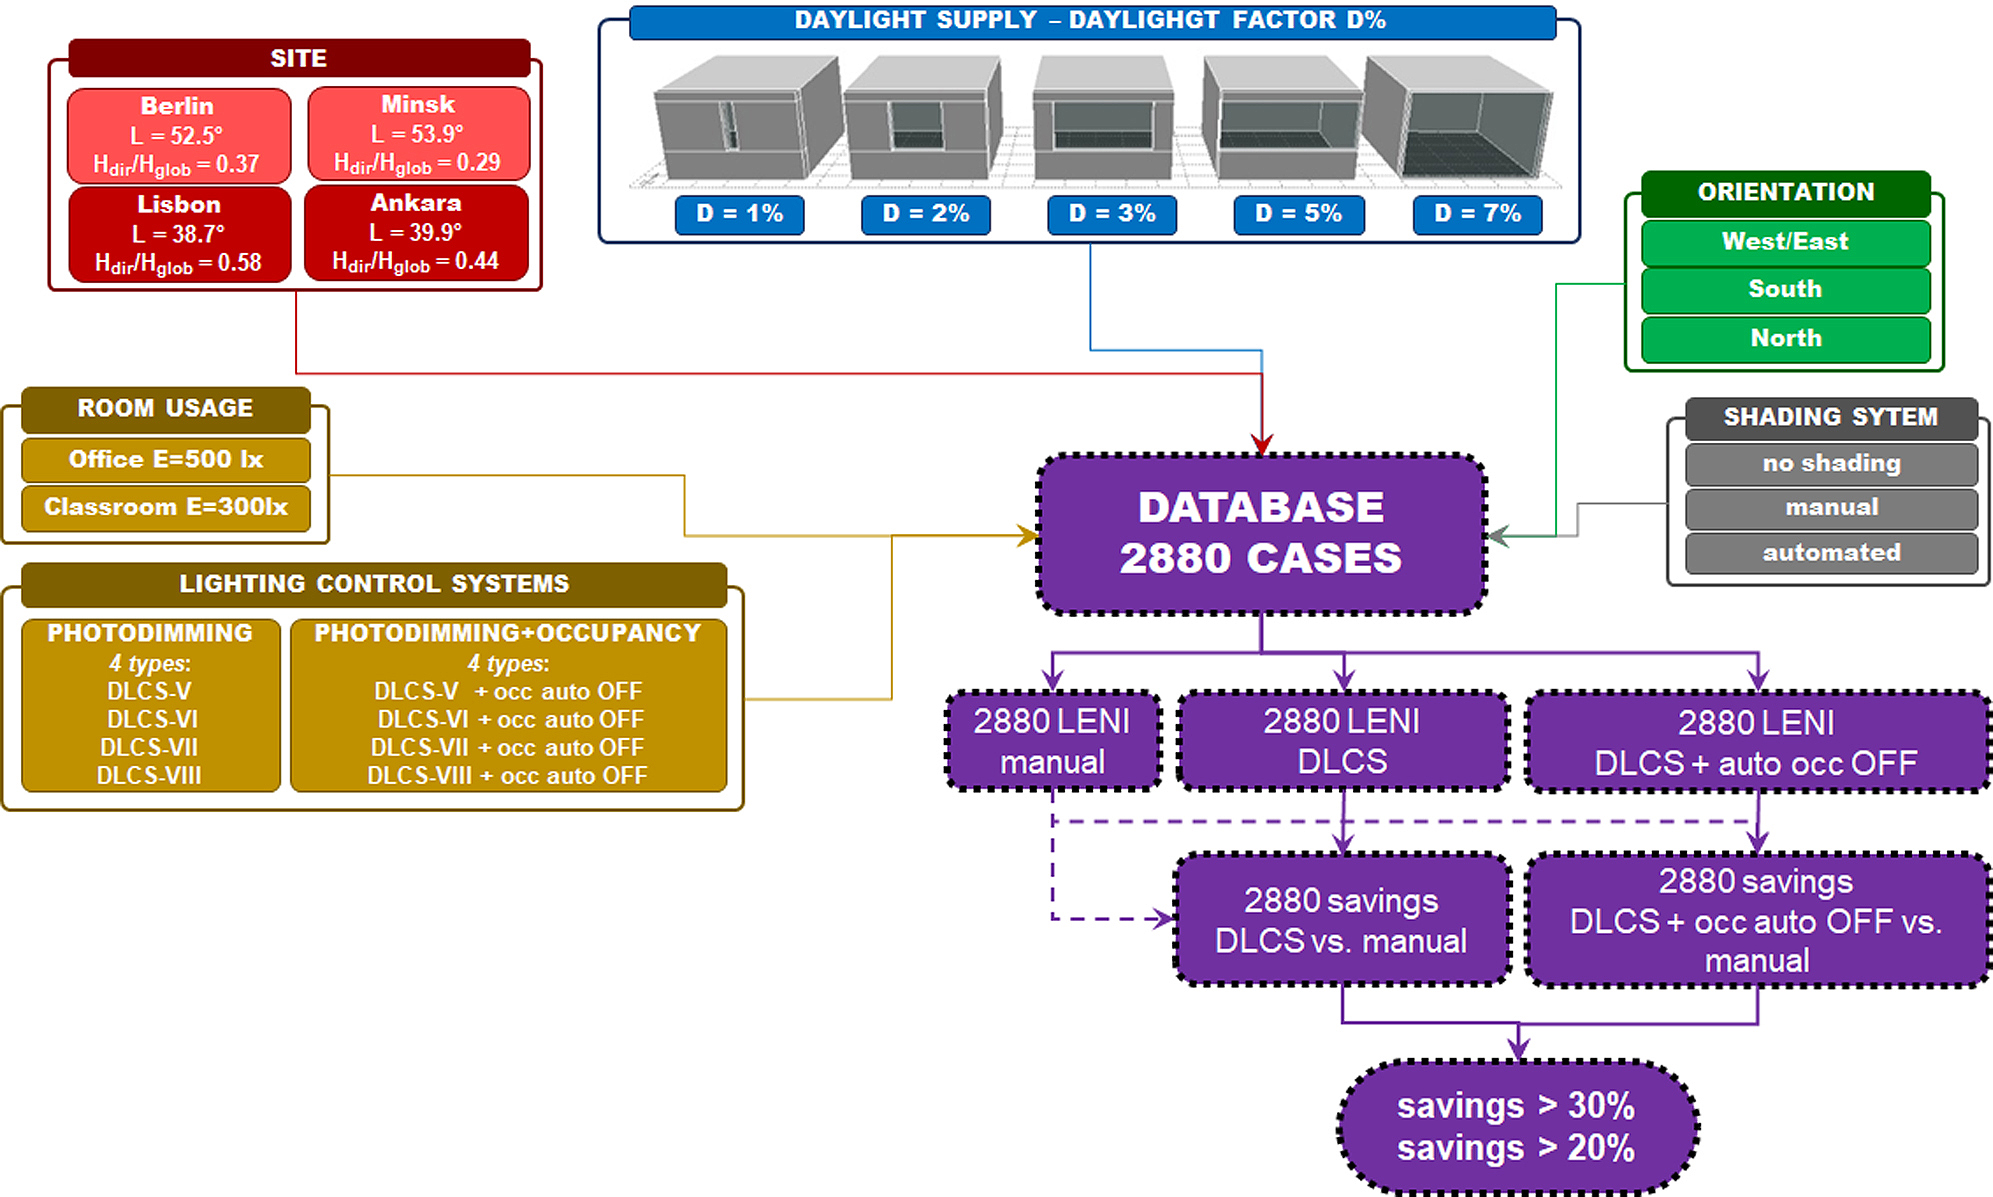 Workflow of the method, which shows how a database of 2880 cases is generated by combining the different variables assumed in the study.